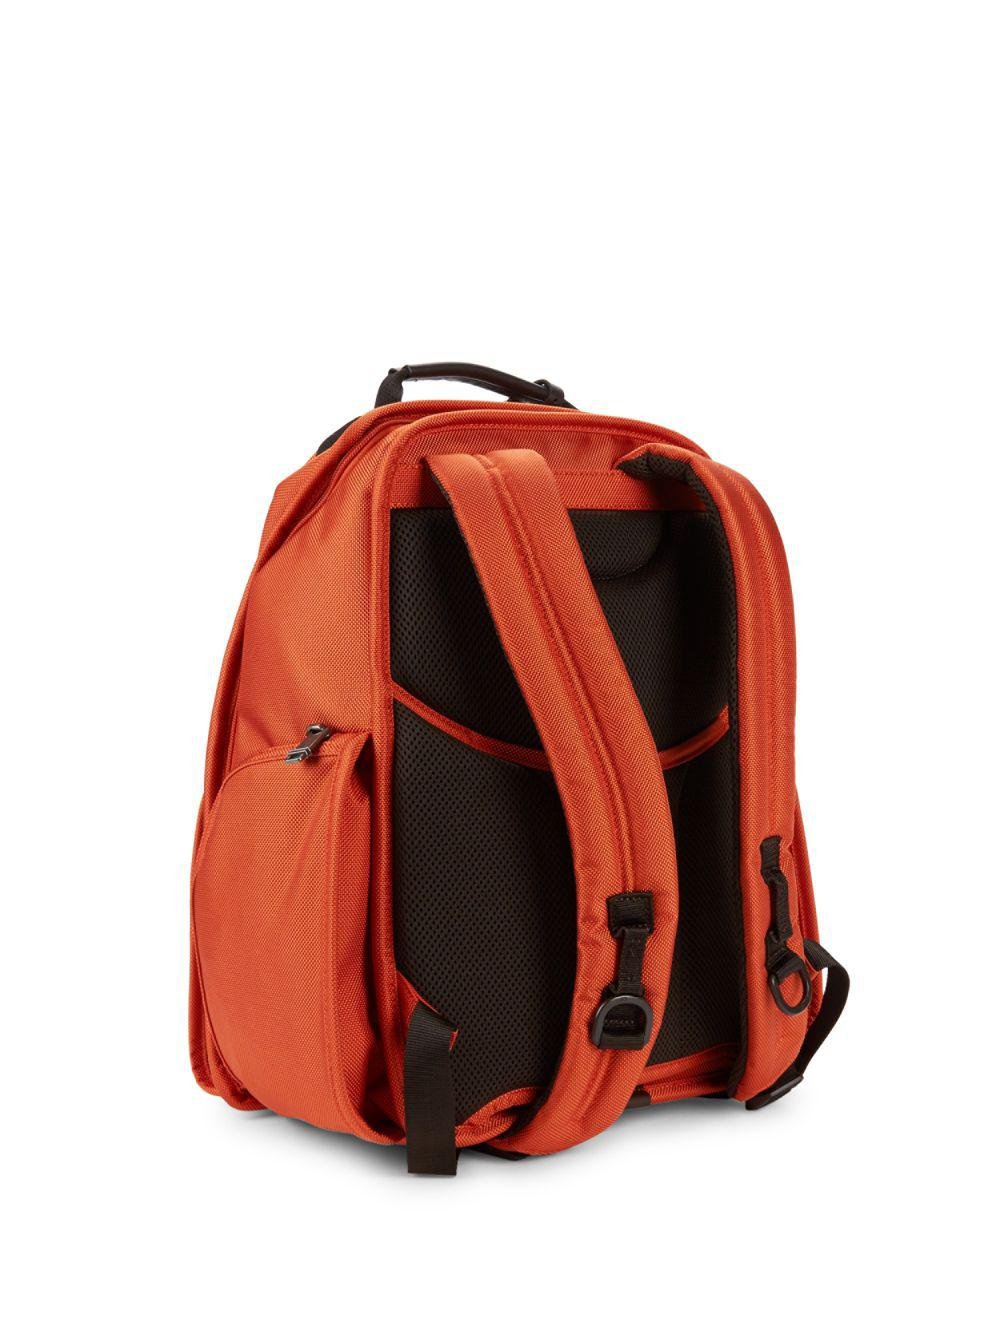 Tumi Synthetic Compact Laptop Brief Backpack in Orange - Lyst